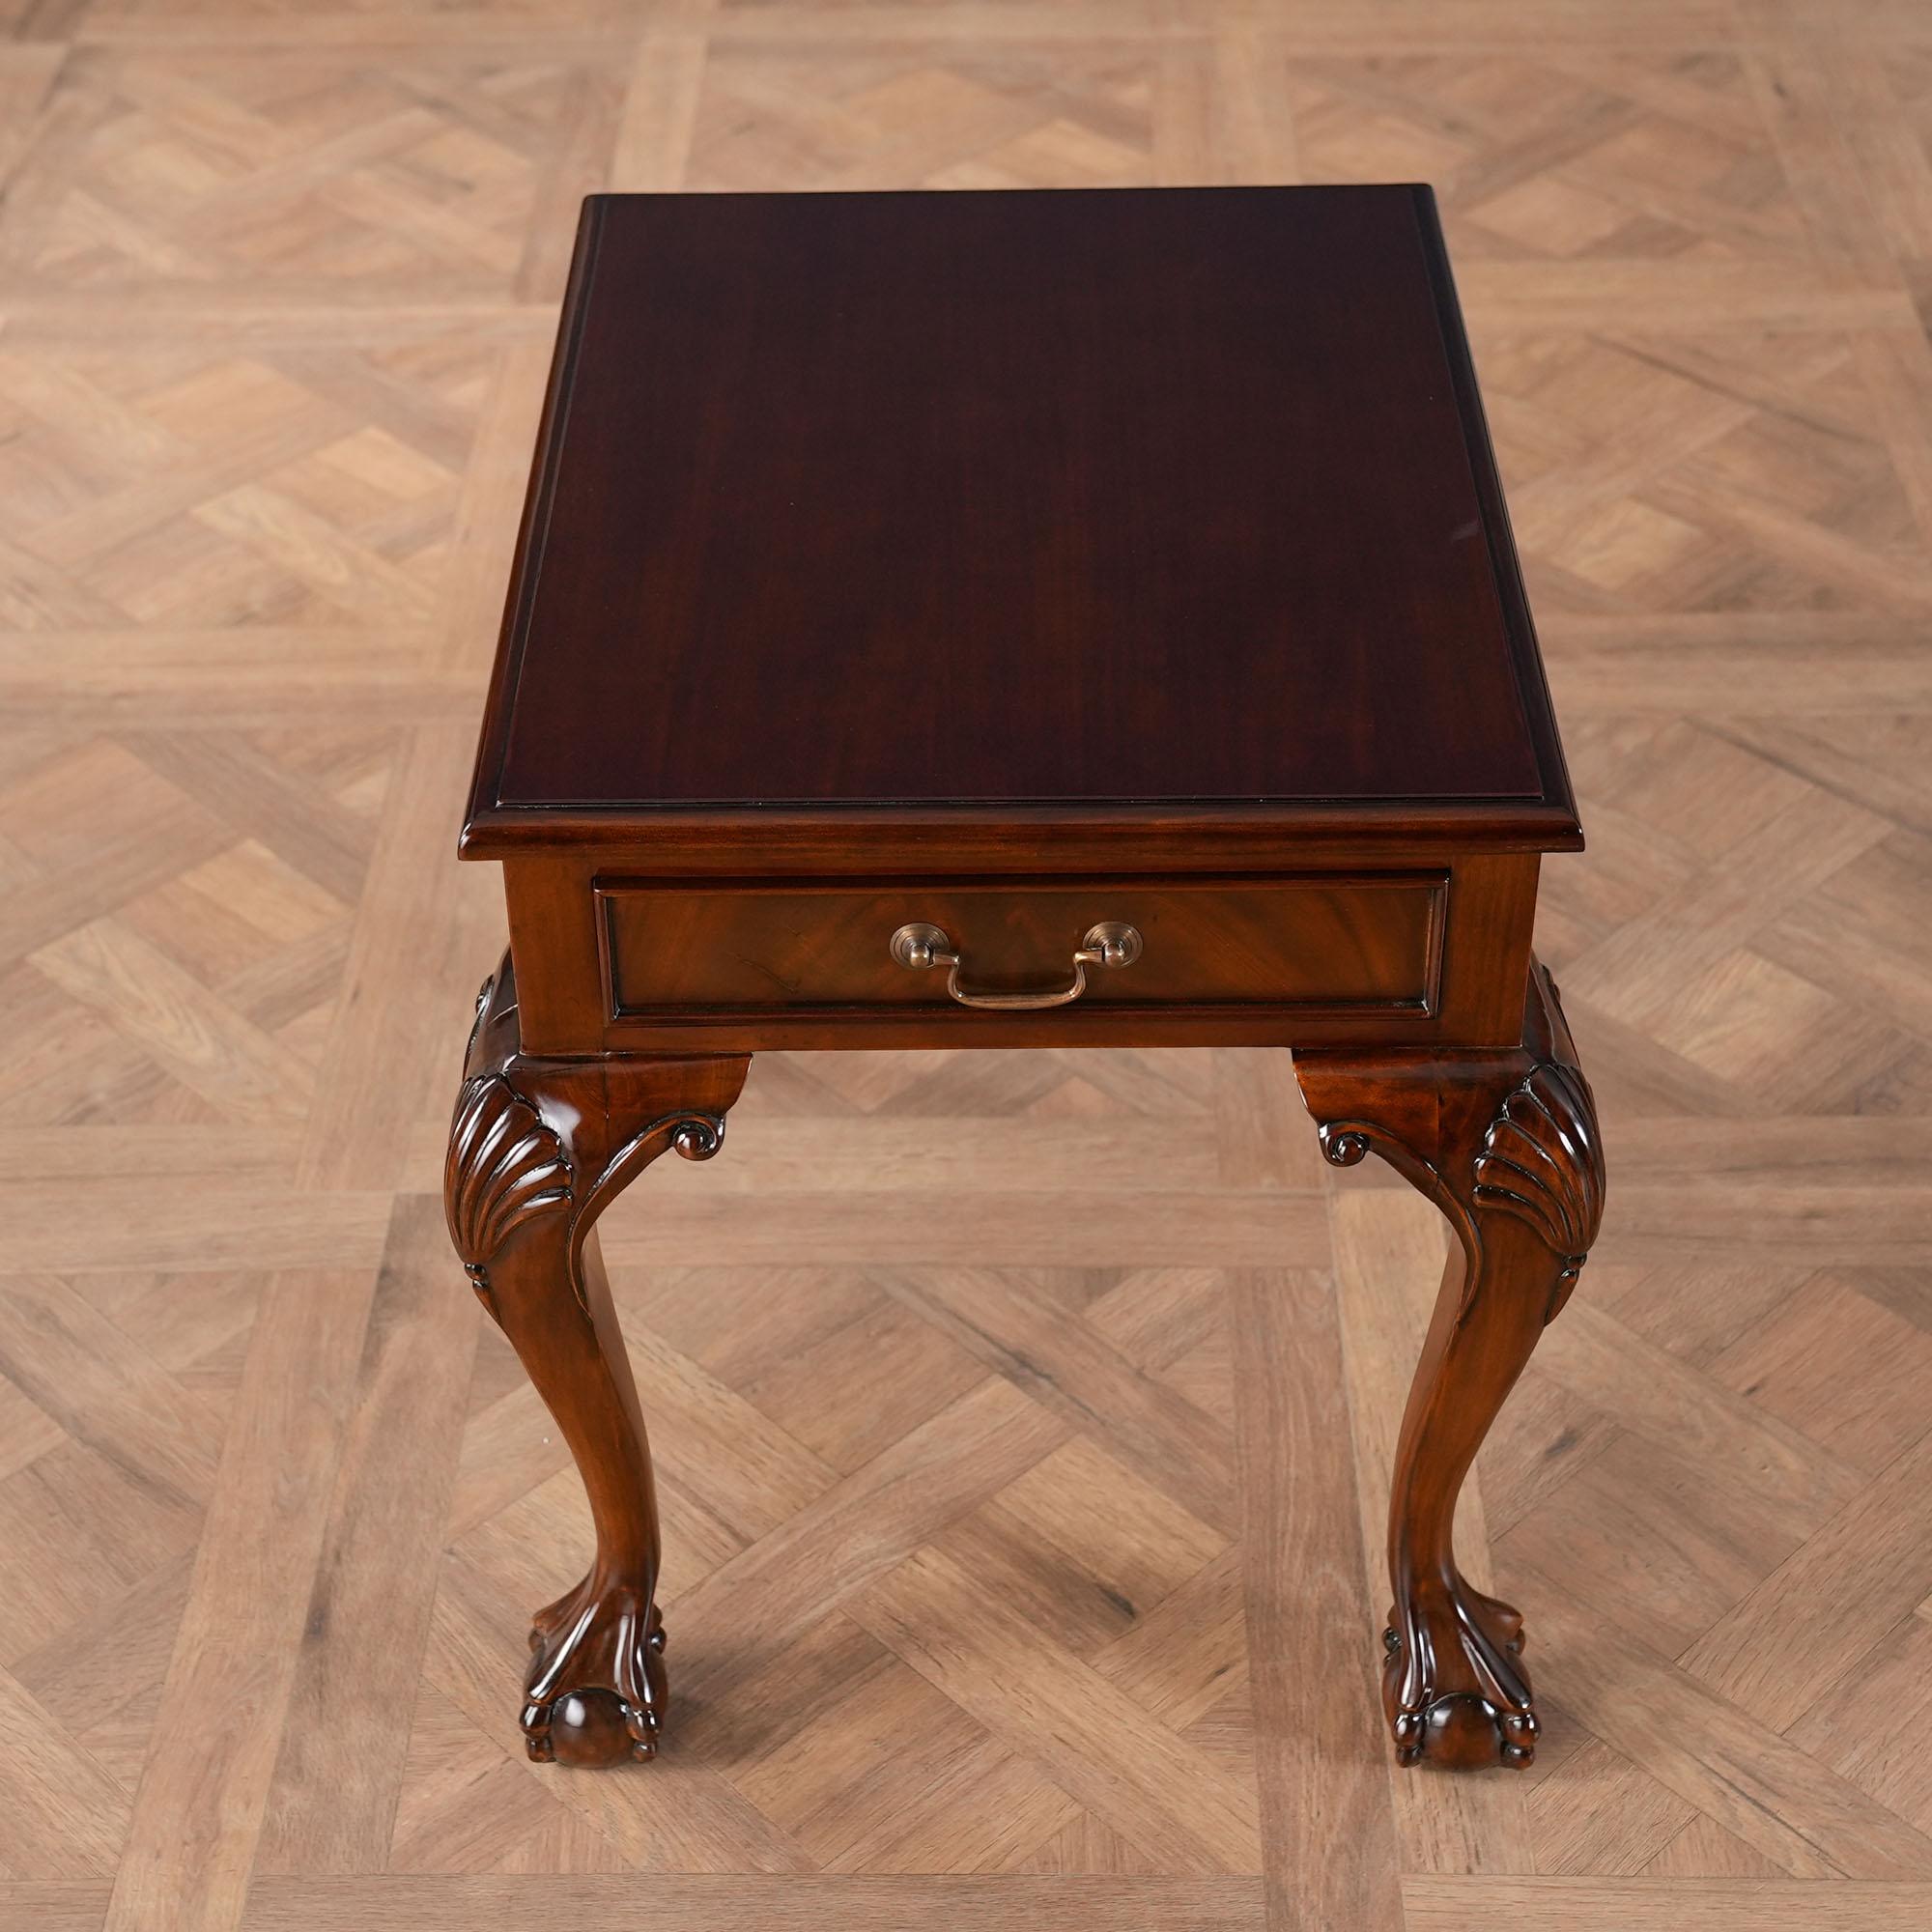 A Chippendale style Ball and Claw Mahogany Lamp Table produced by Niagara Furniture with an attractive mahogany top surrounded by a lovely molding and over a frame containing a dovetailed drawer. The entire Lamp Table is supported on hand carved,